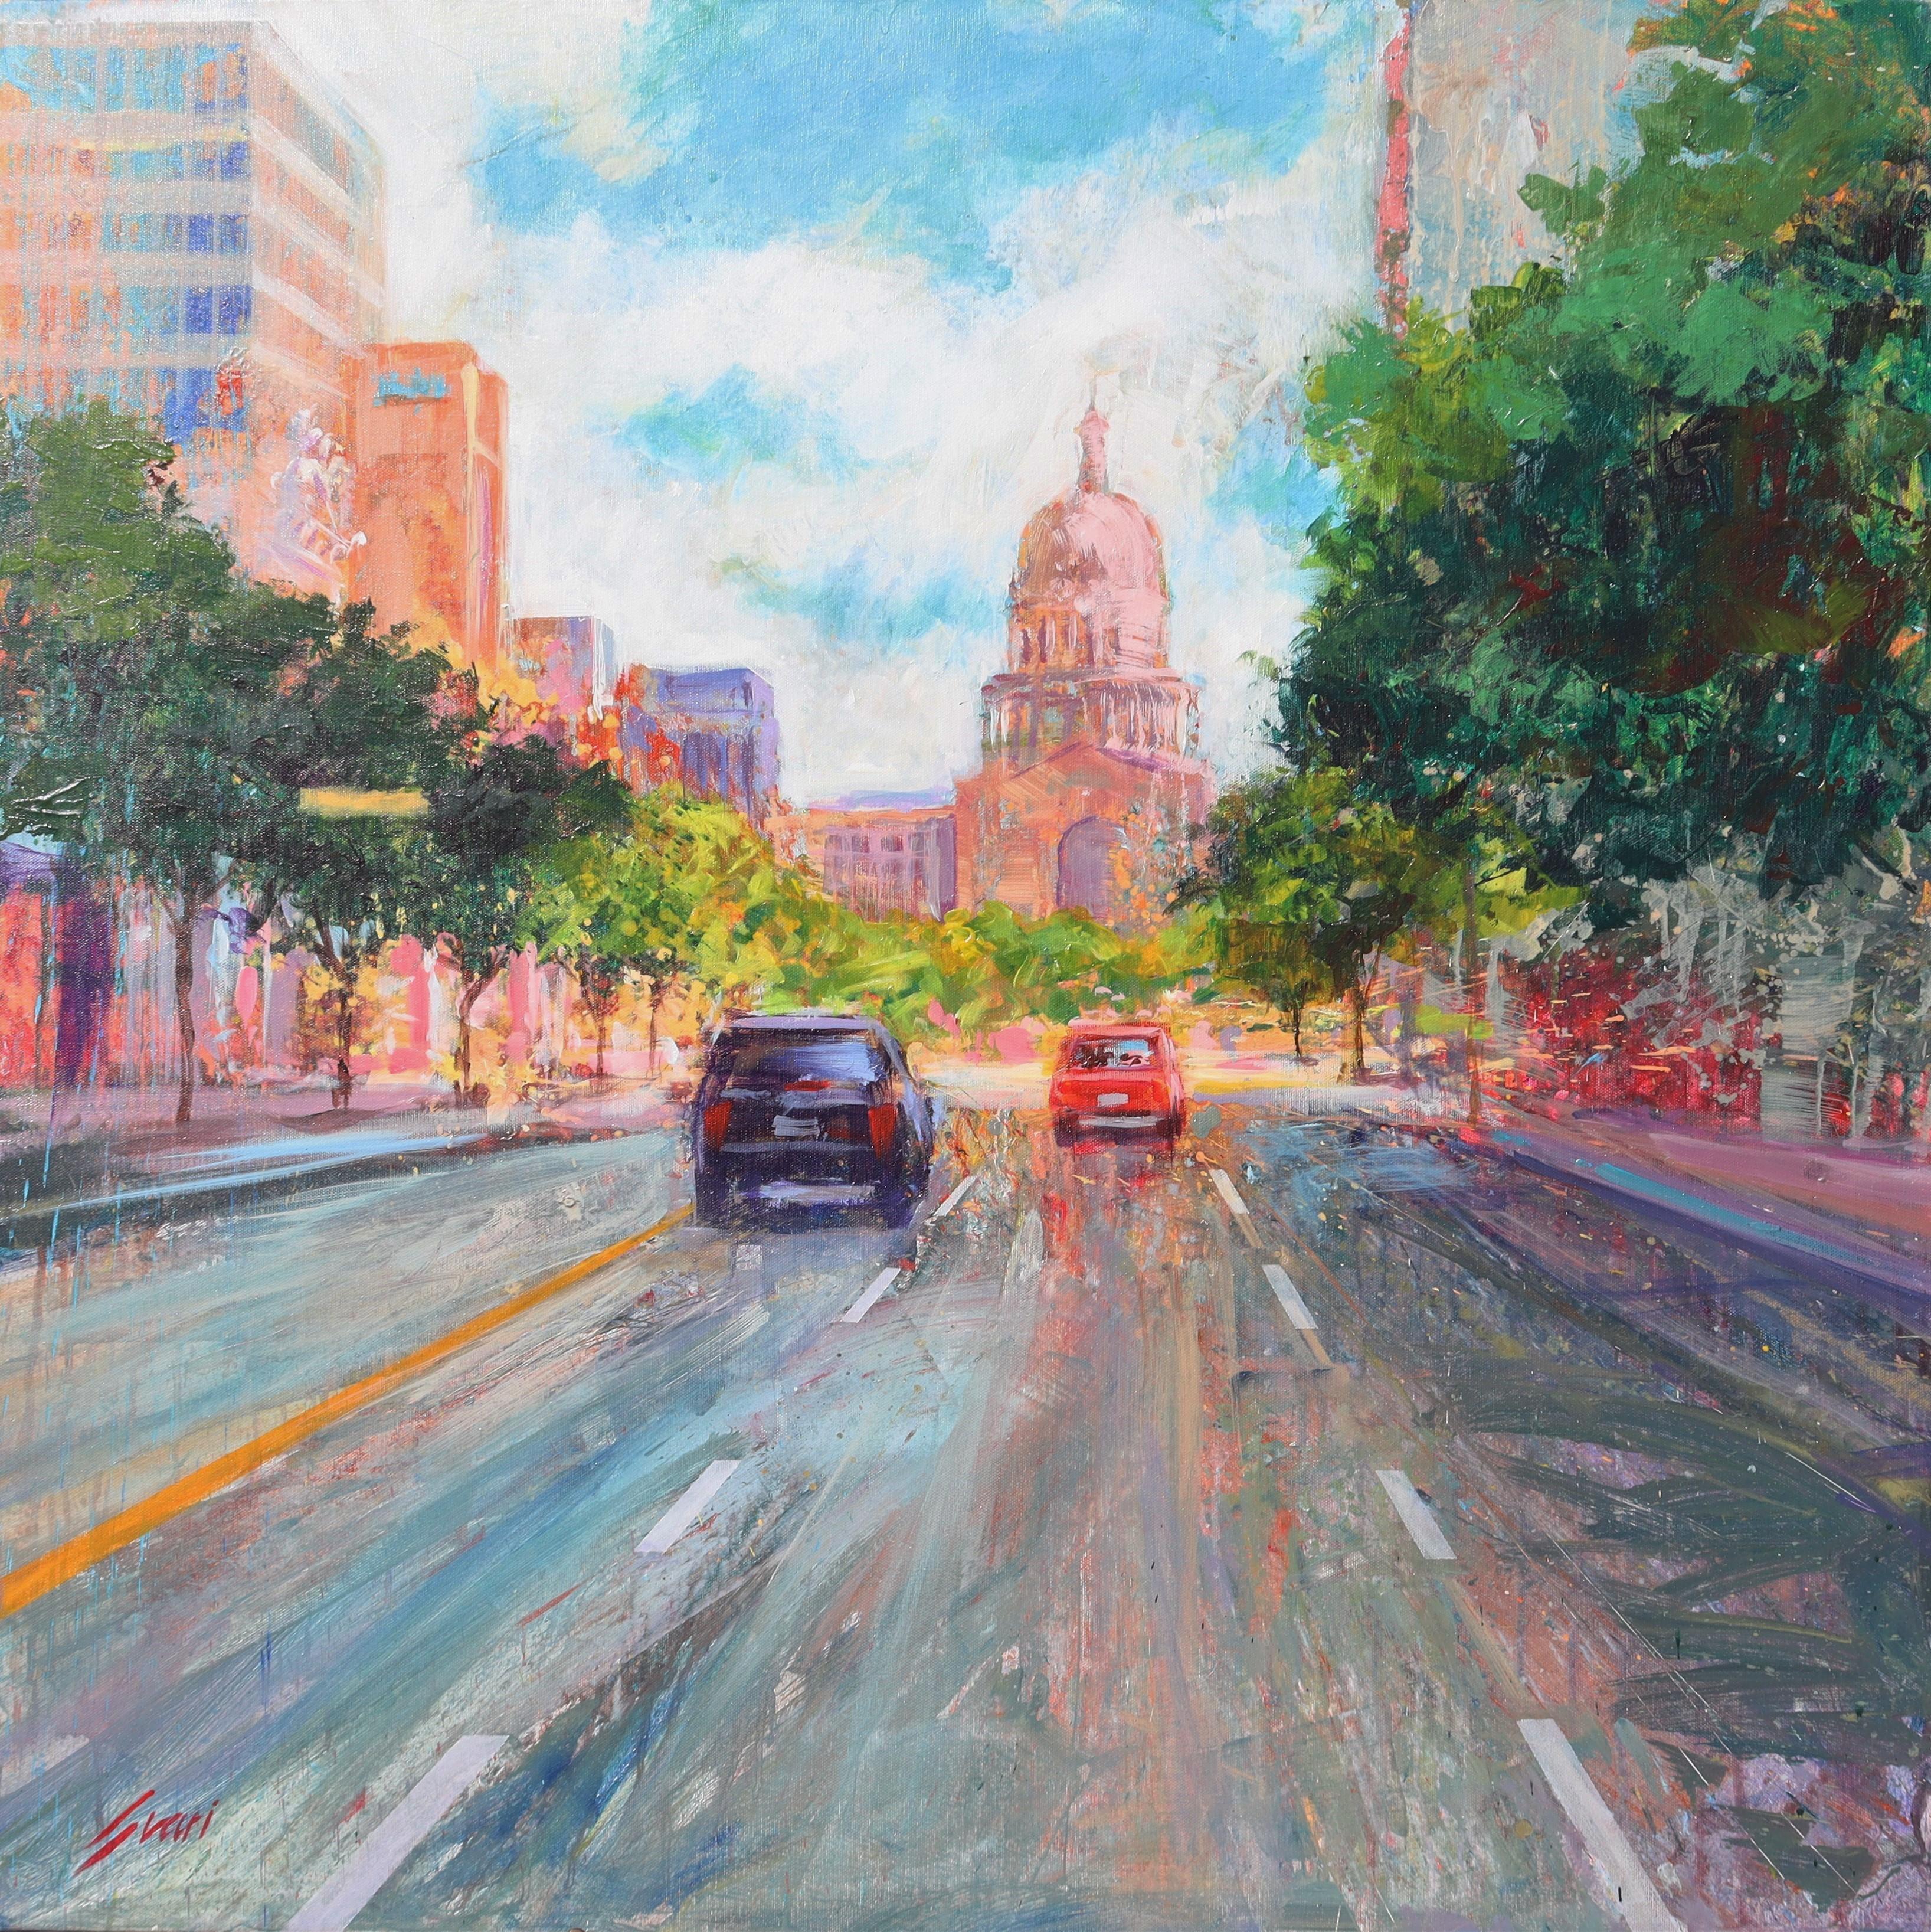 Congress Ave - Painting by Pep Suari